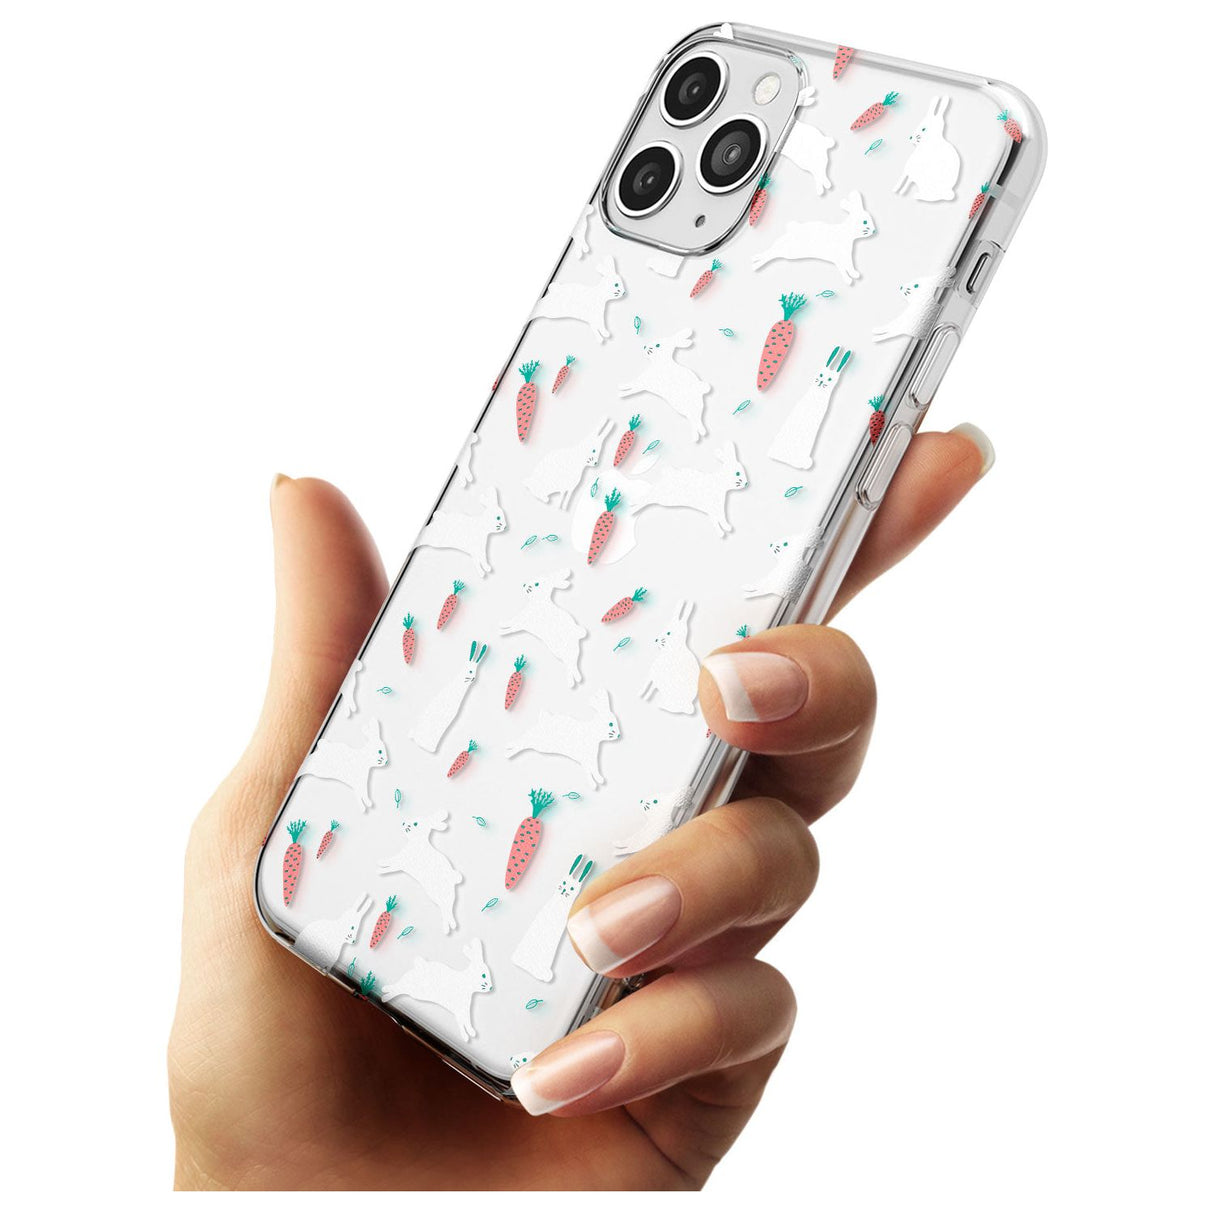 White Bunnies and Carrots Slim TPU Phone Case for iPhone 11 Pro Max